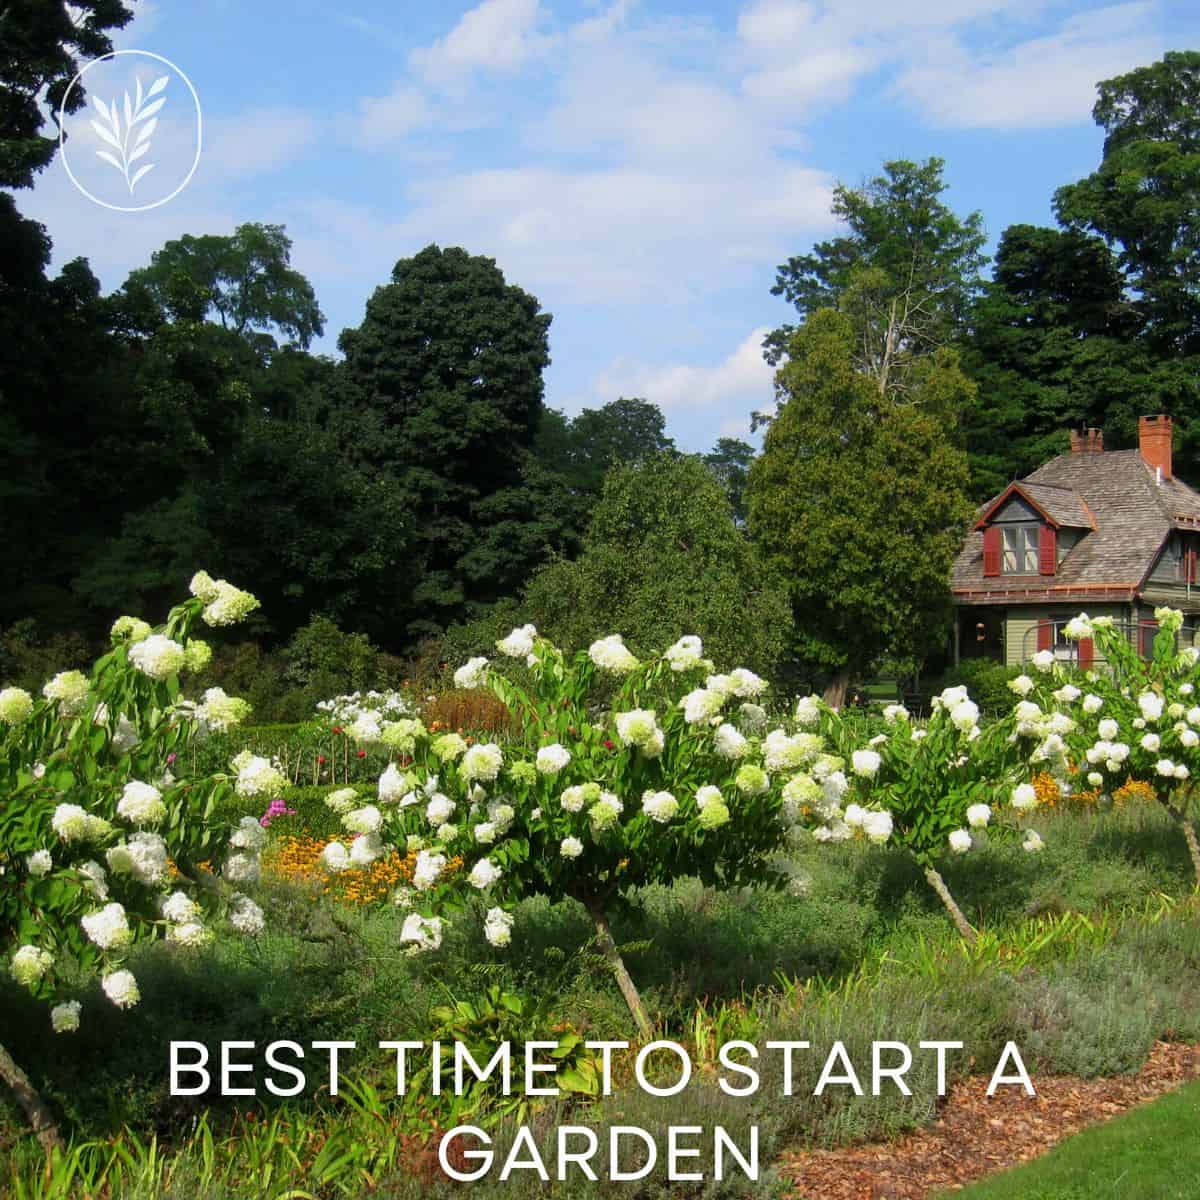 Best time to start a garden via @home4theharvest